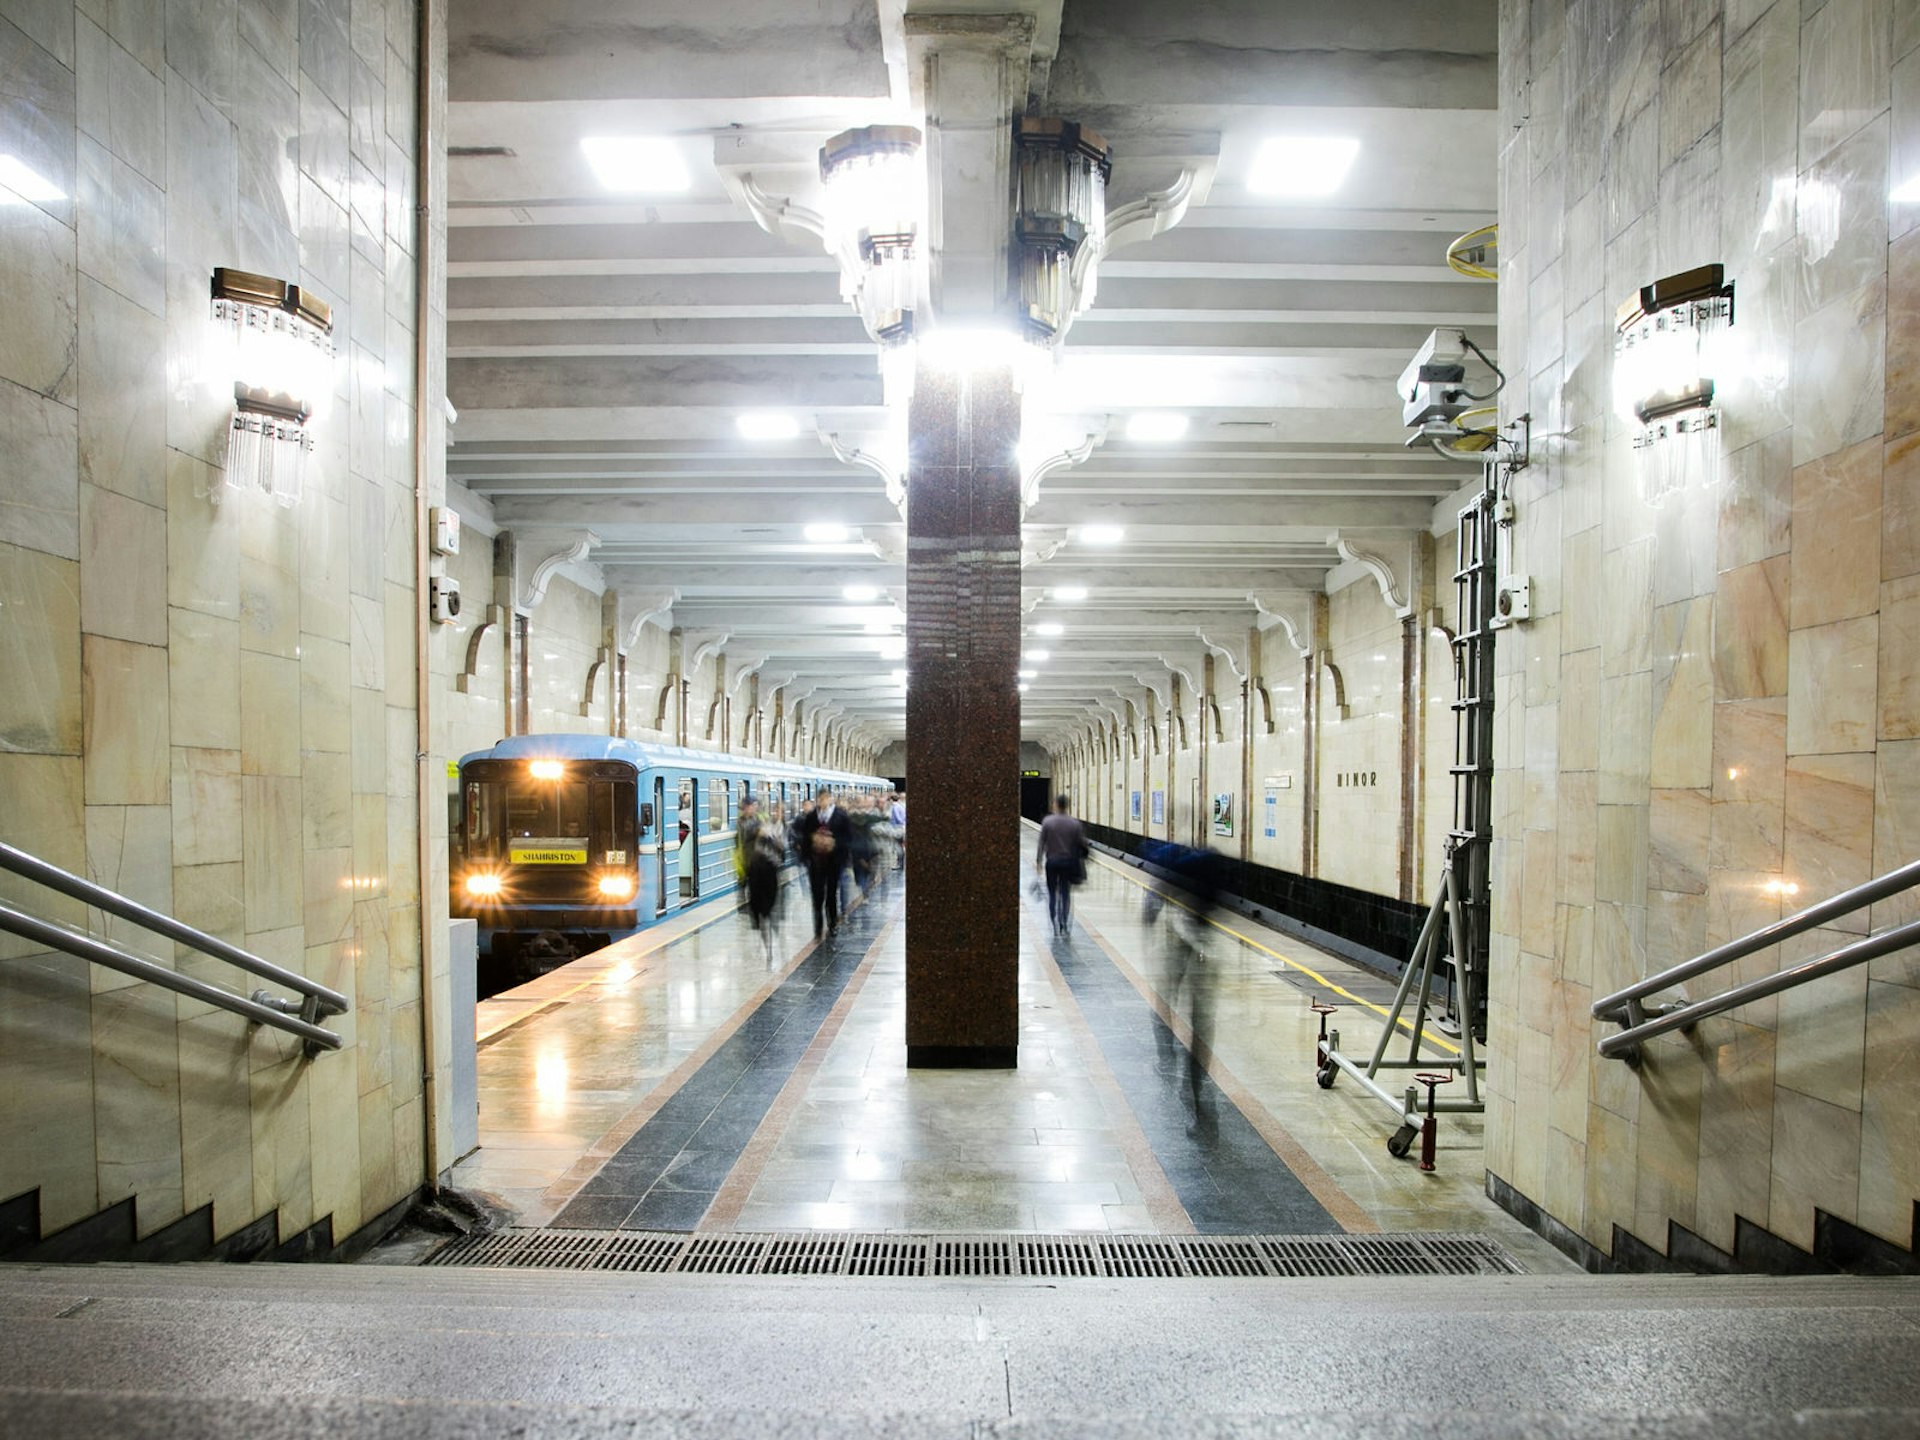 View of Minor station on the Tashkent Metro with a blue train passing through the platform on the left and bright white lights illuminating the floor.